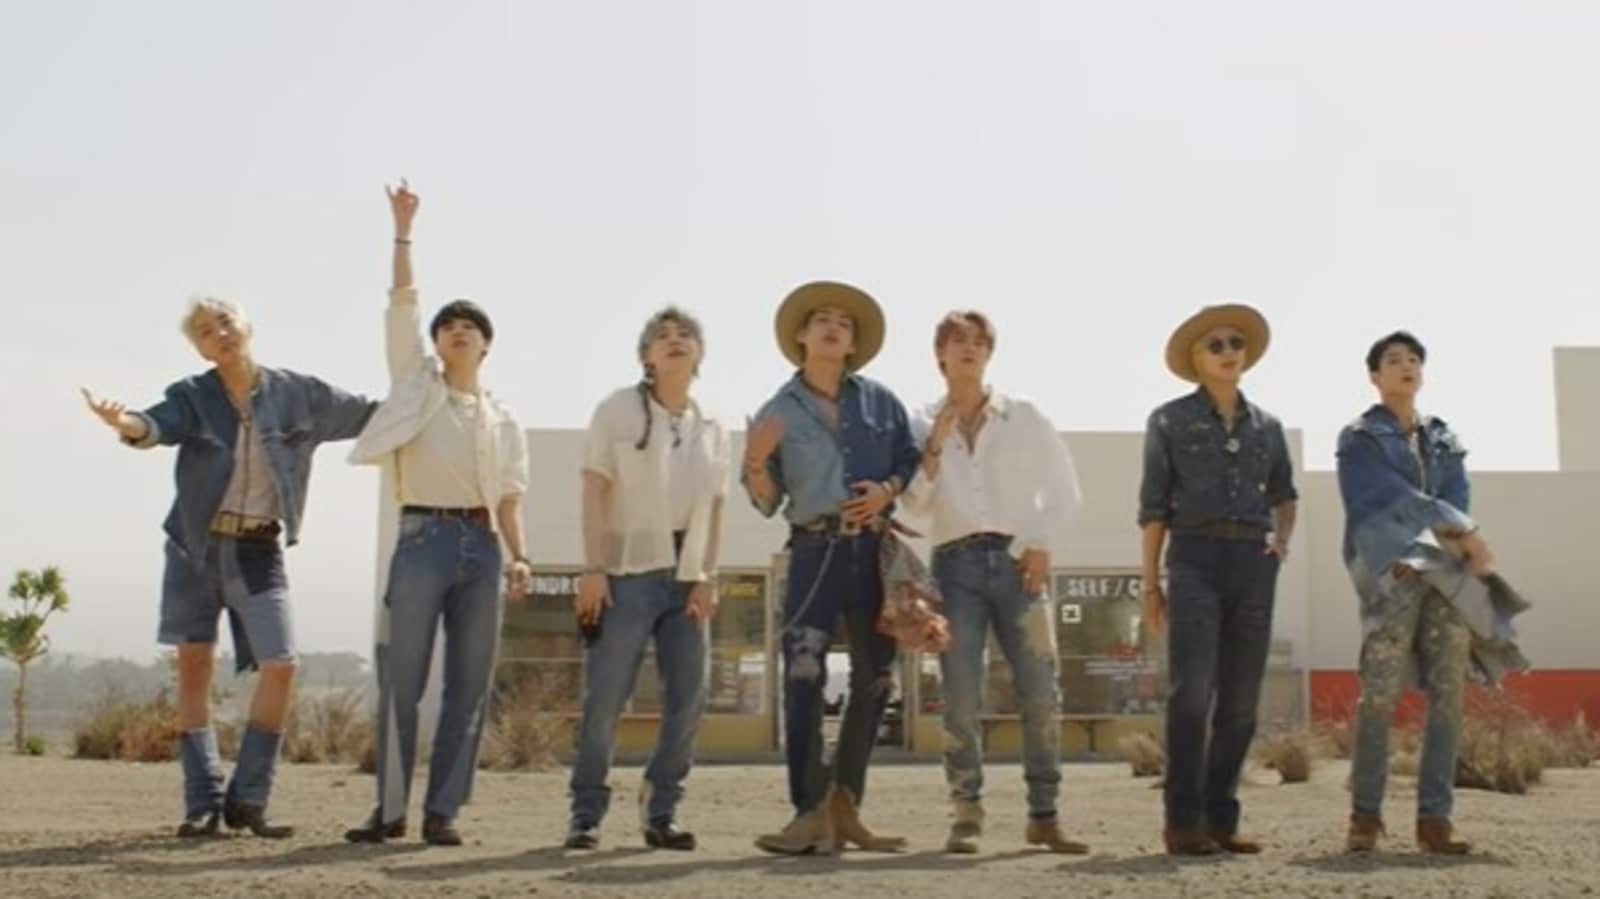 BTS Permission to Dance teaser has fans gushing over 'Cowboy Taehyung', Butter rules Hot 100 for 6th week